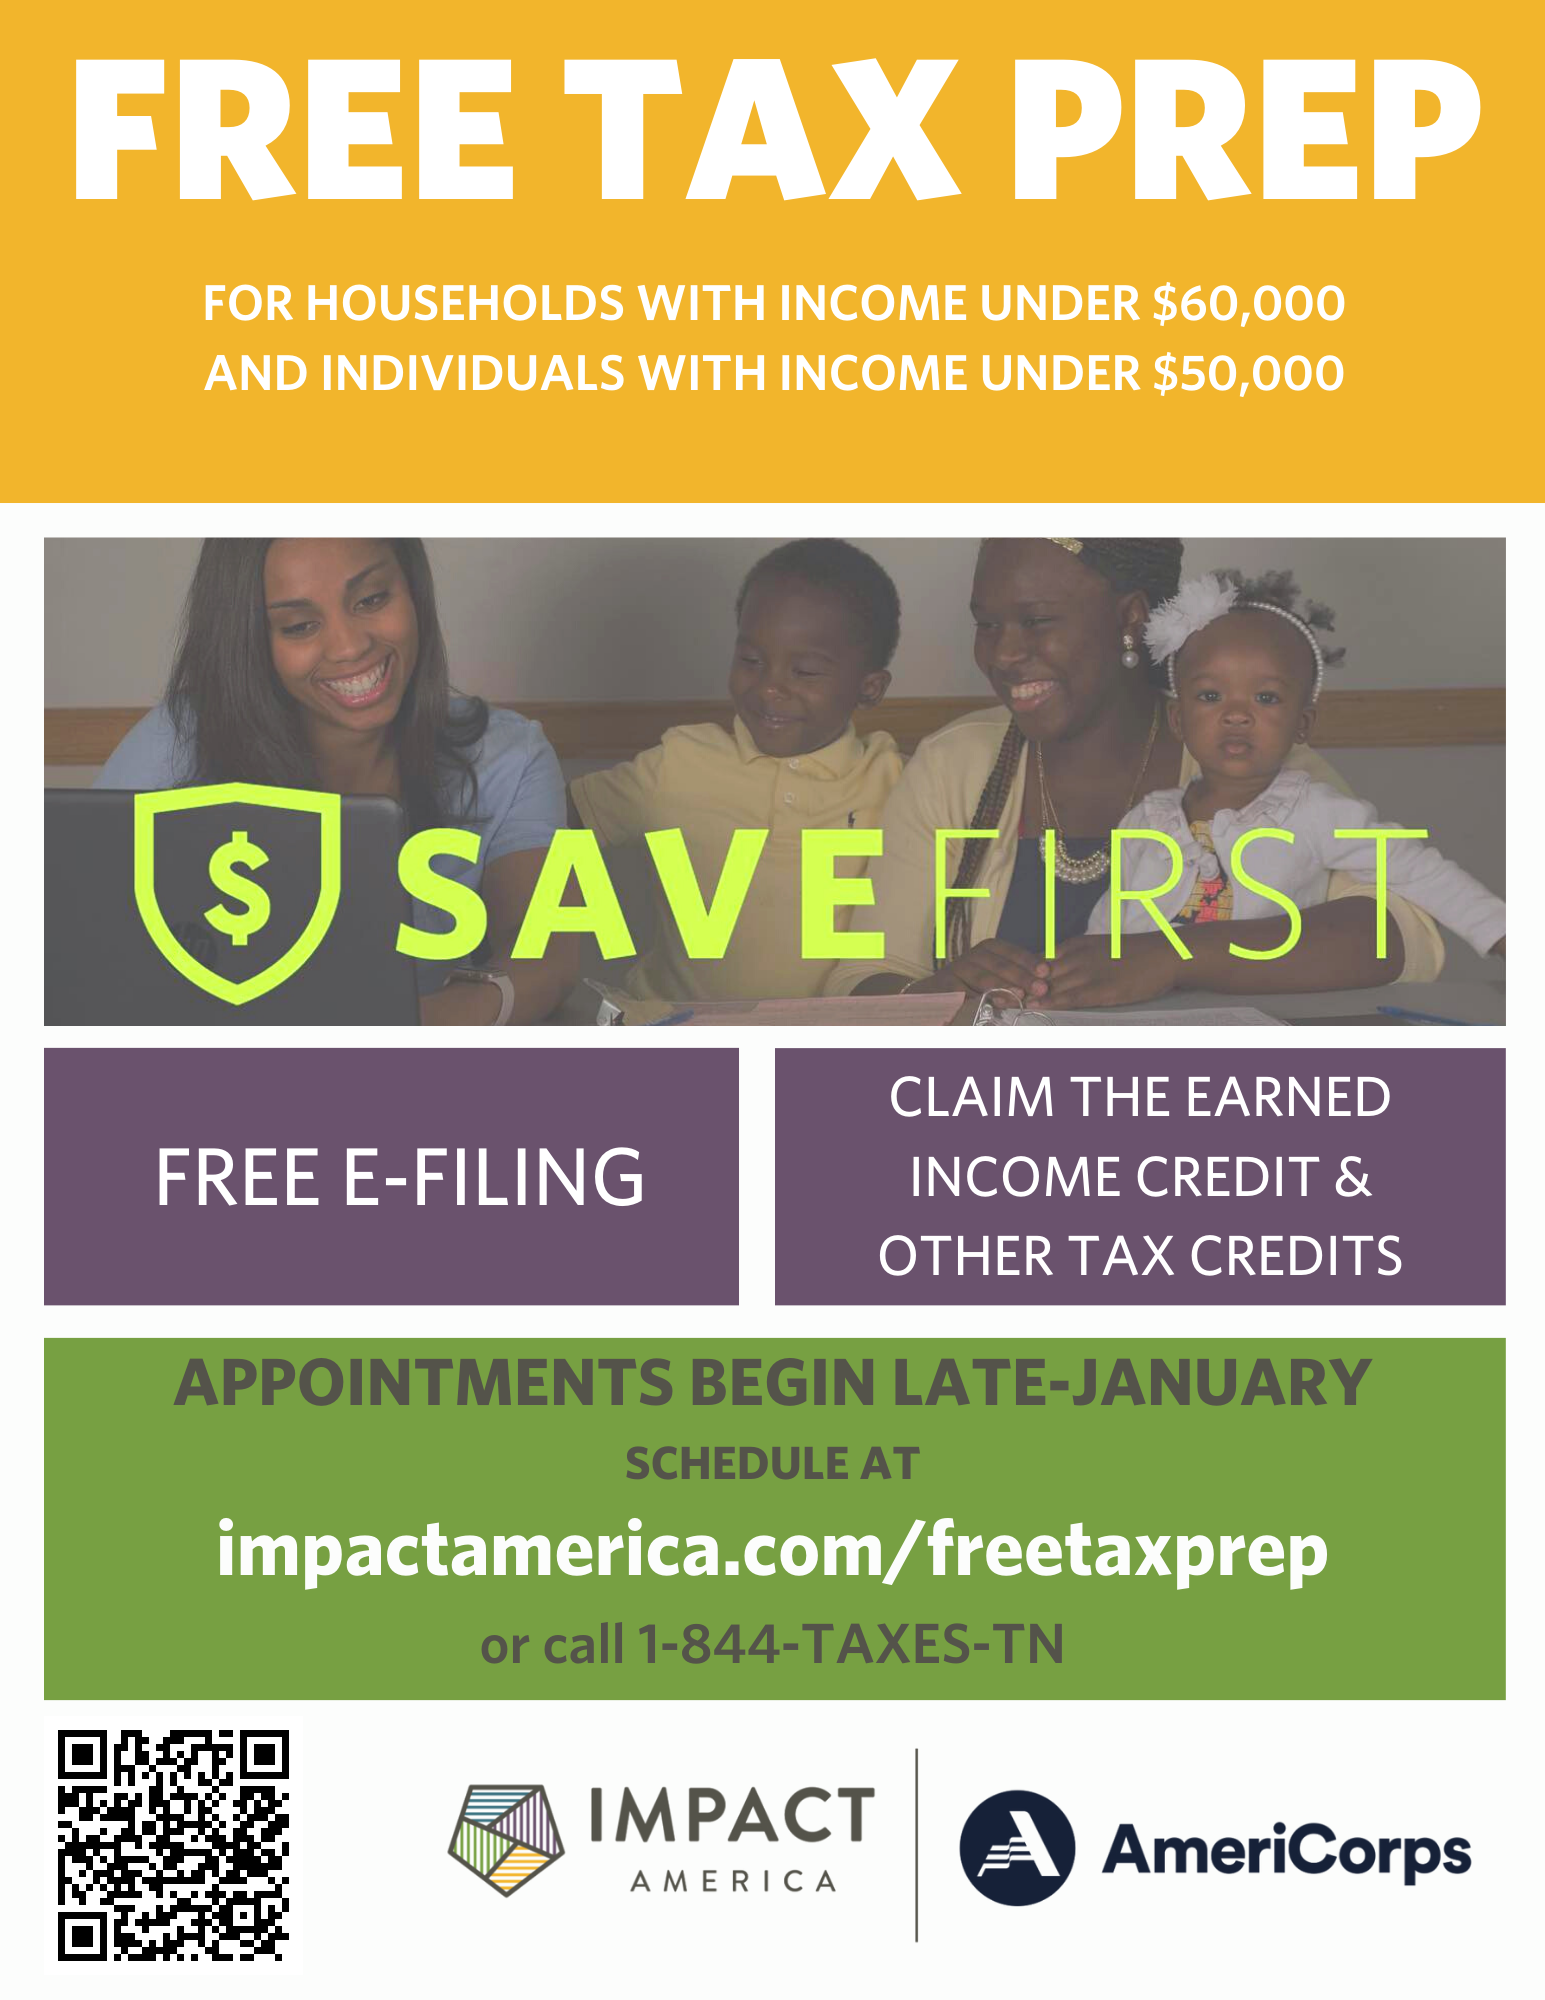 Savefirst free tax prep flyer. Get involved with Impact America's Tax Prep program and receive free assistance with your taxes.